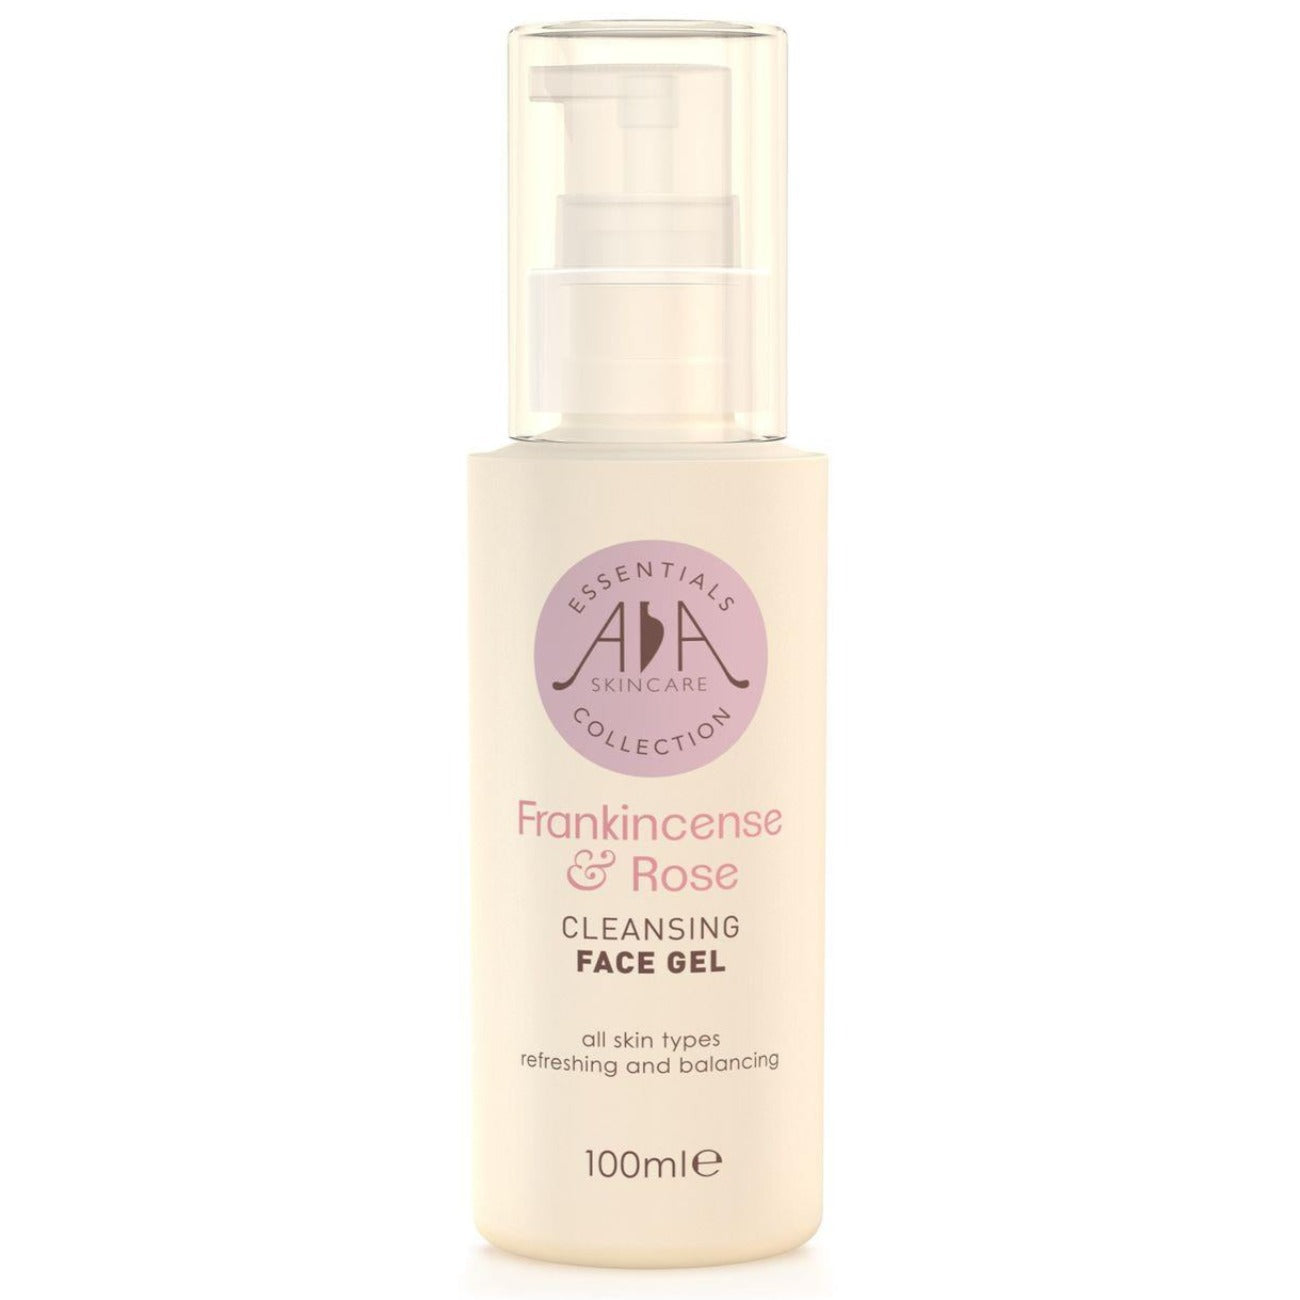 Frankincense & Rose Cleaning Face Gel 100ml